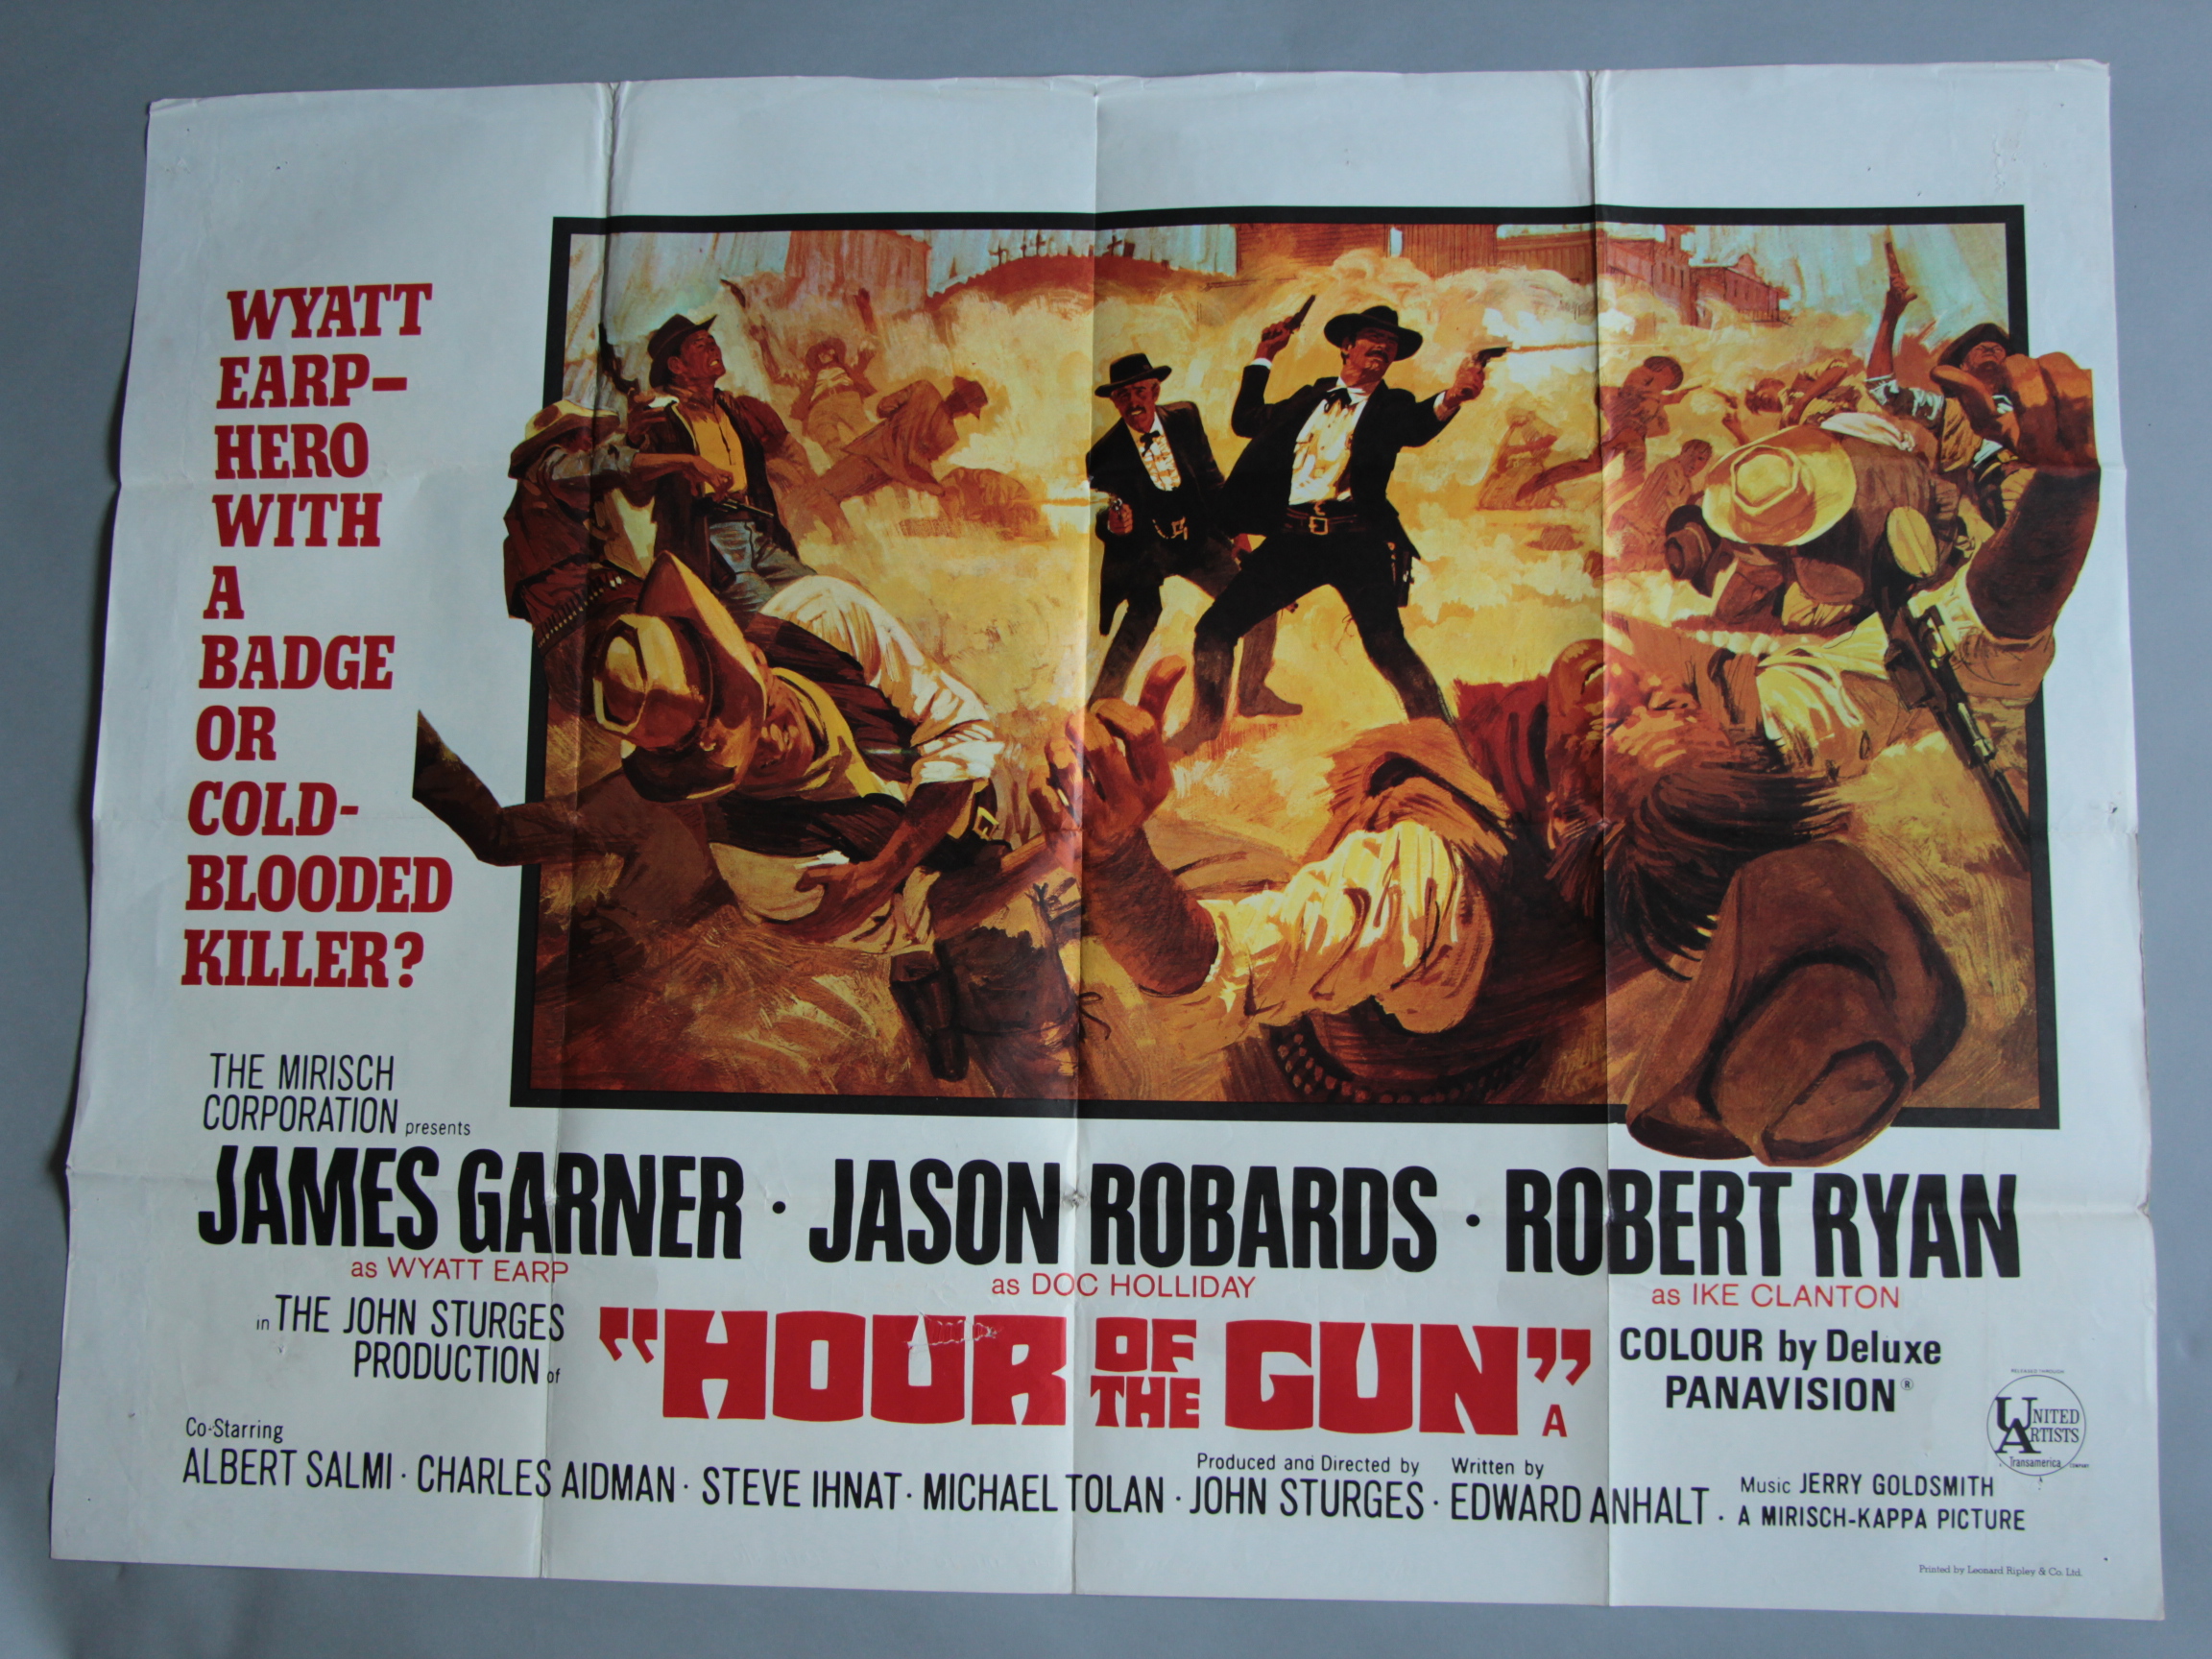 Collection of Western genre British Quad Film Posters 30x40" including: The Rare Breed (1966) - Image 8 of 15